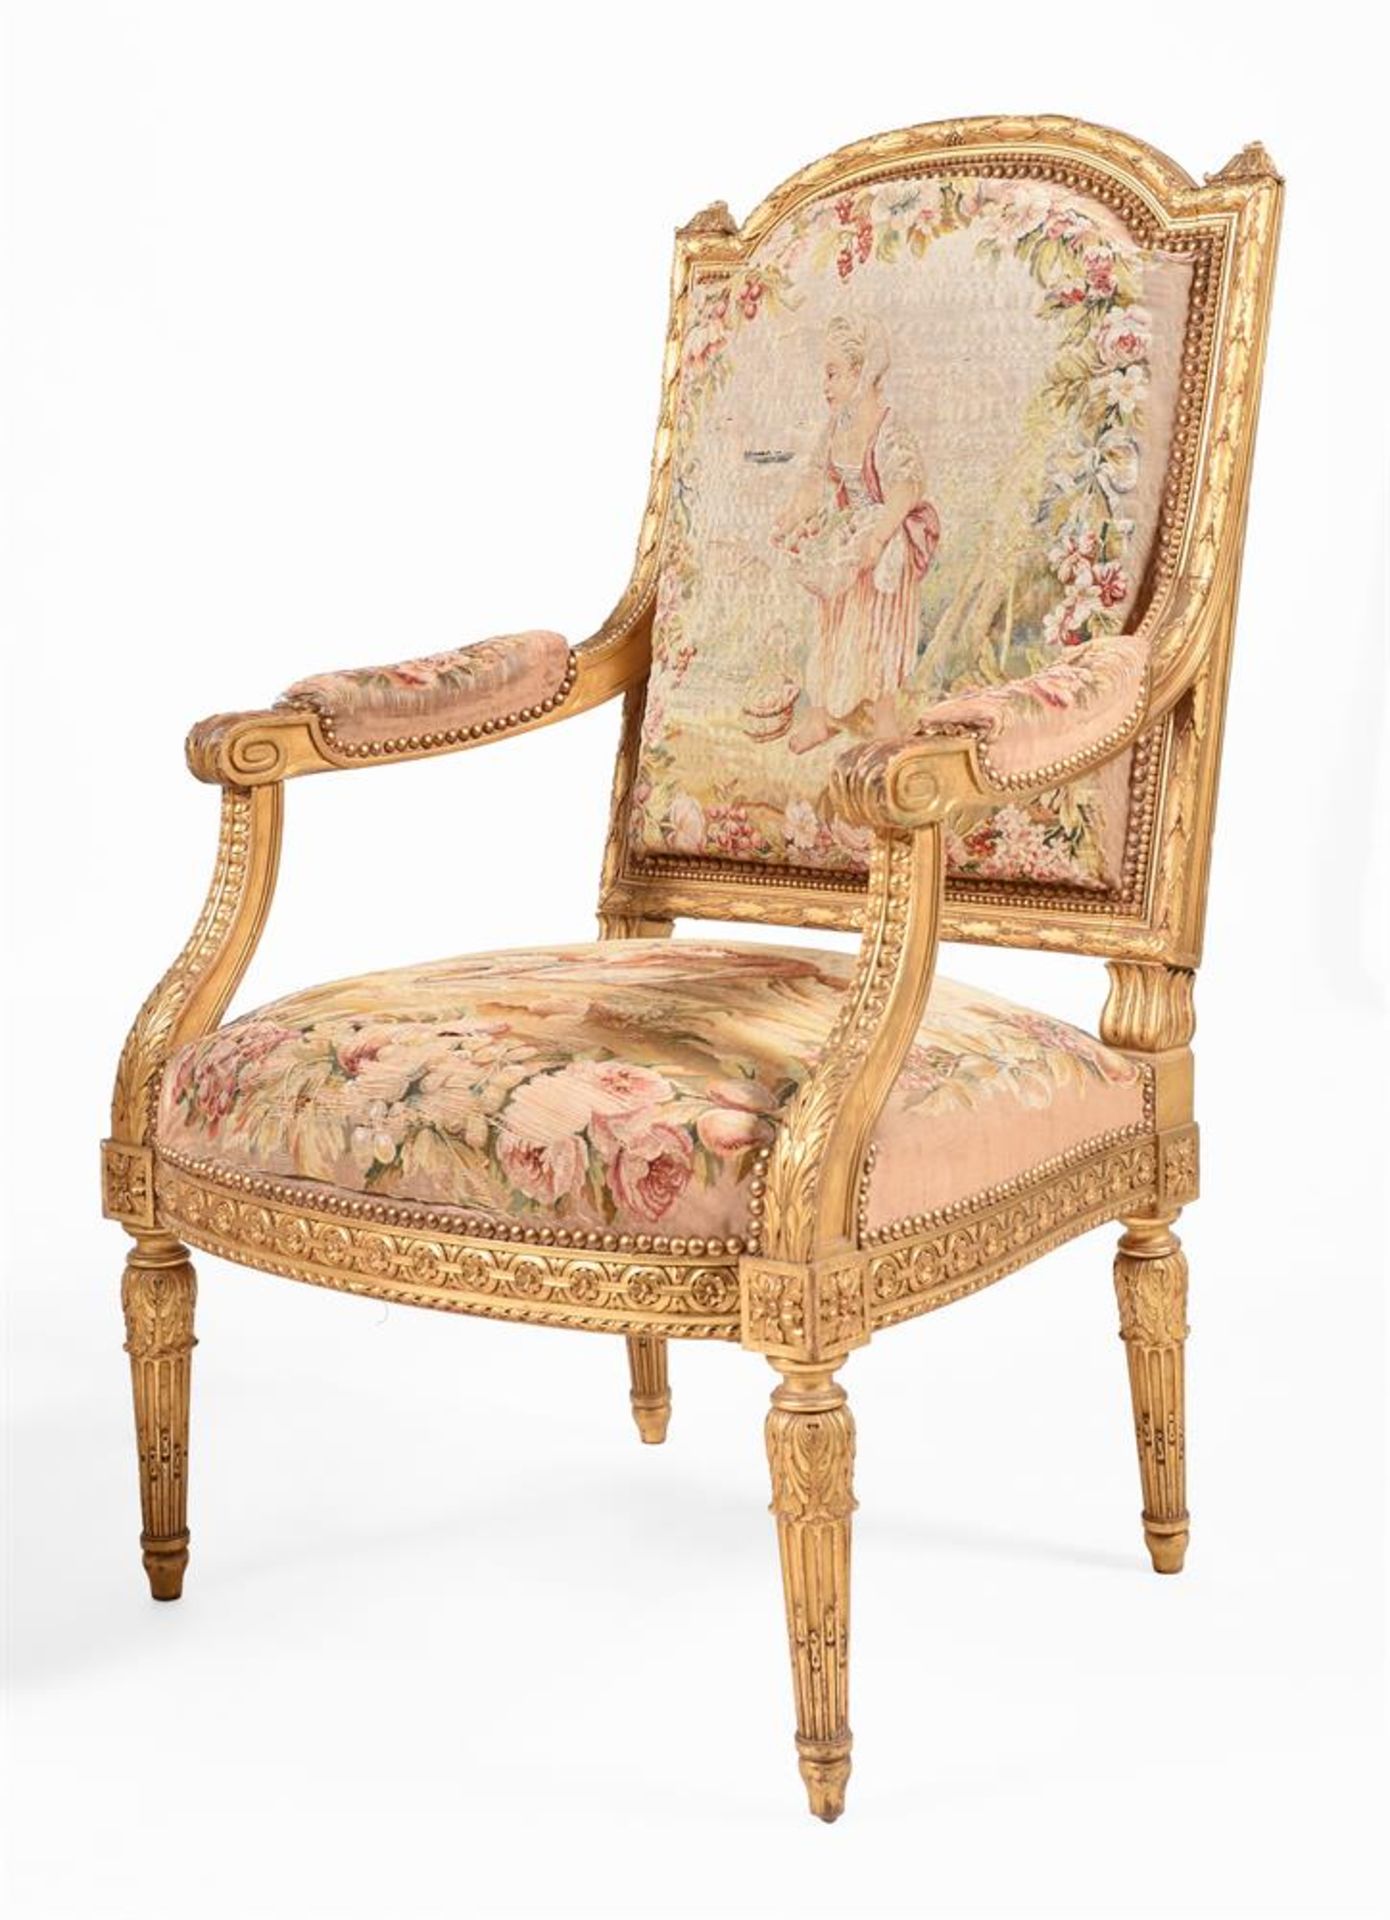 A FRENCH TRANSITIONAL AUBUSSON UPHOLSTERED GILTWOOD SALON SUITE, IN LOUIS XVI STYLE - Image 7 of 10